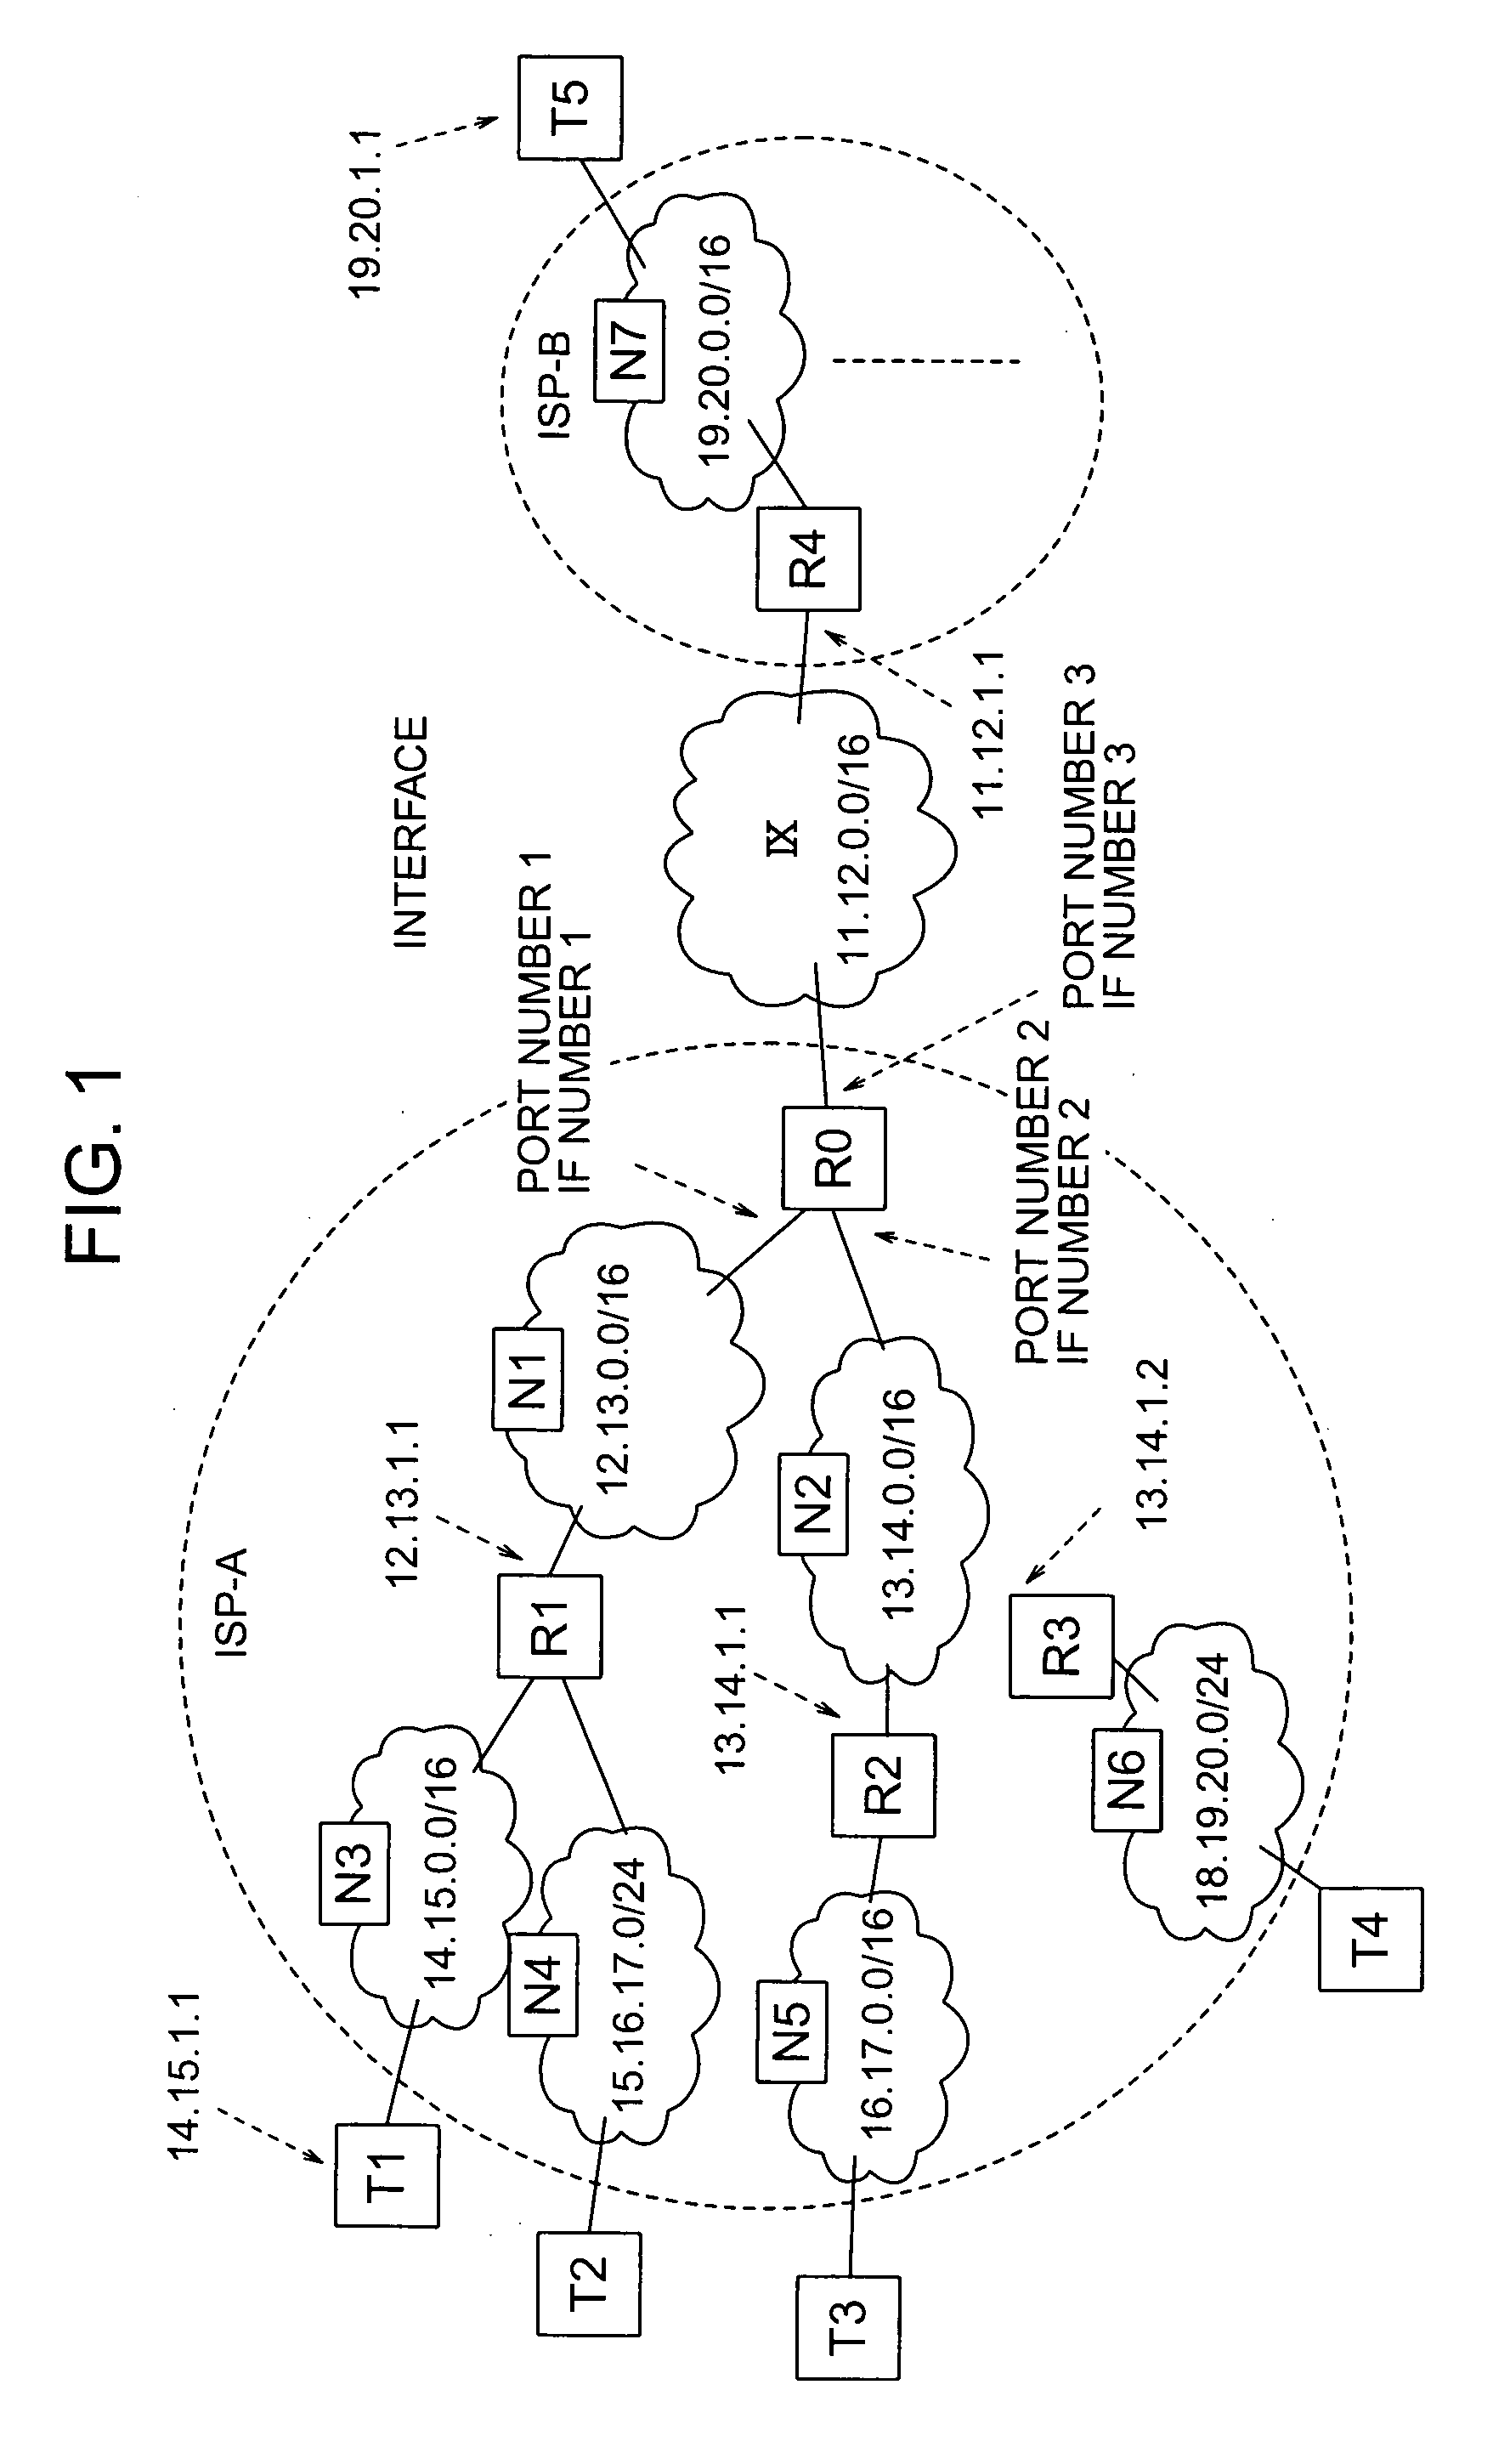 Packet forwarding device with packet filter